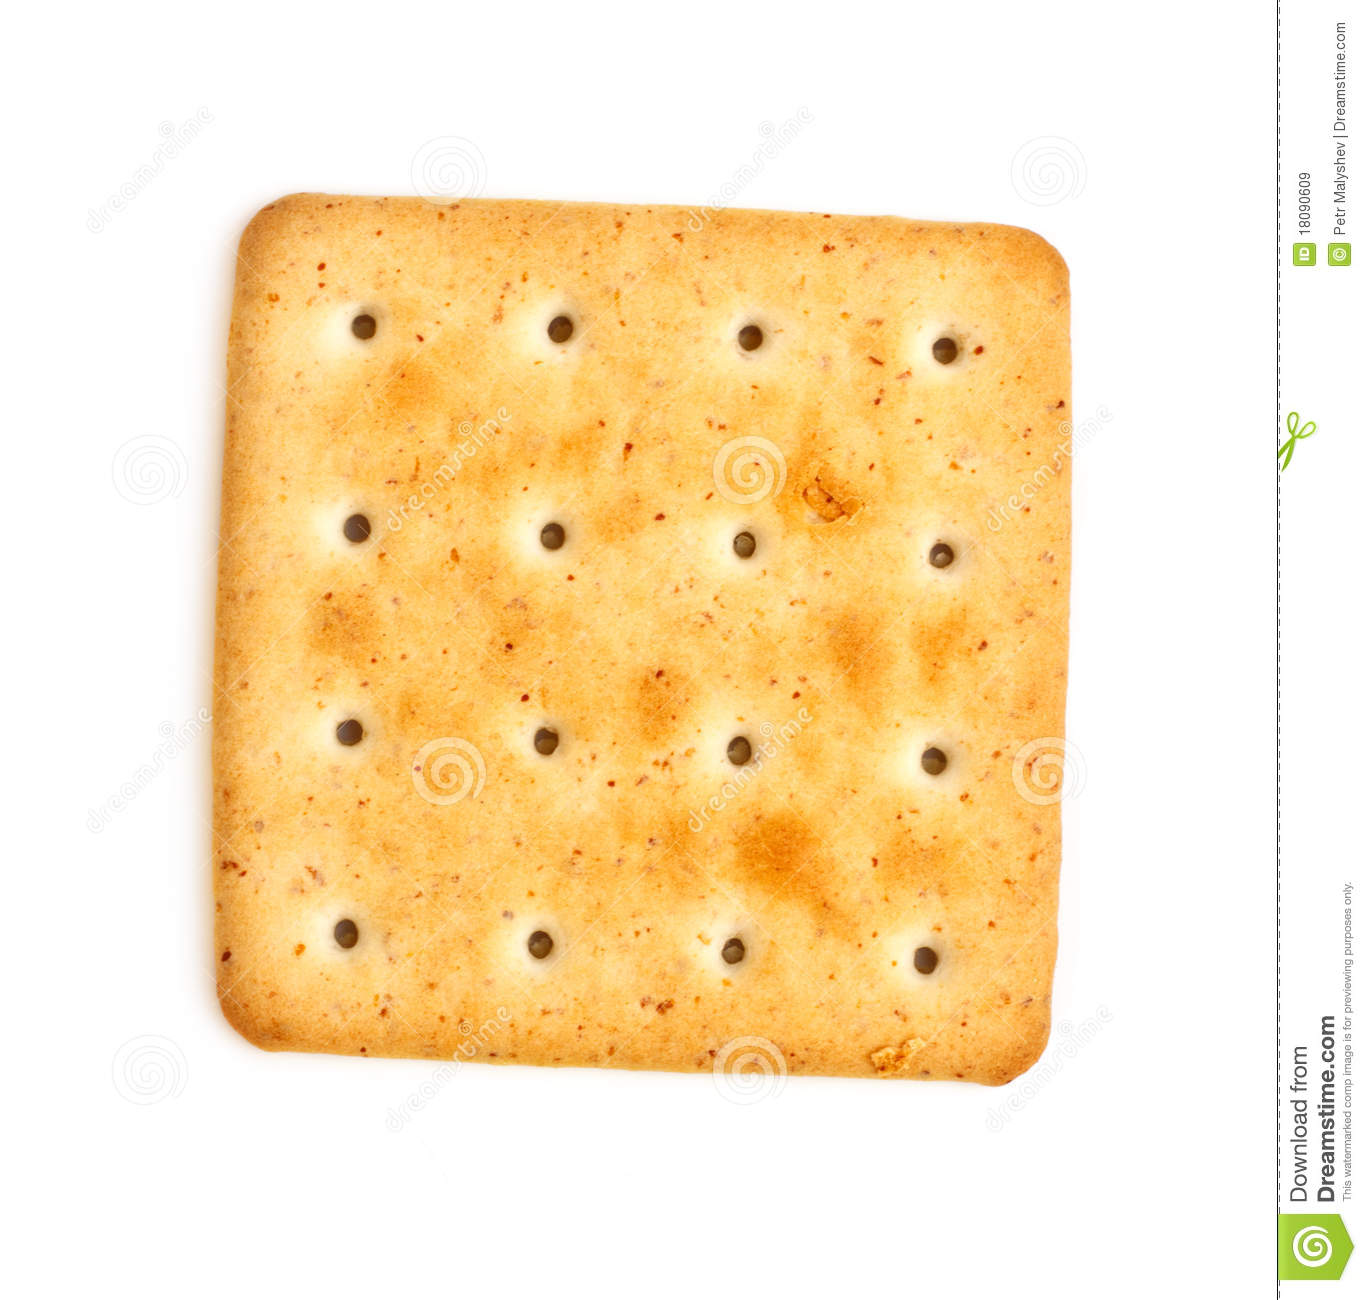 Salty Cracker Royalty Free Stock Images   Image  18090609